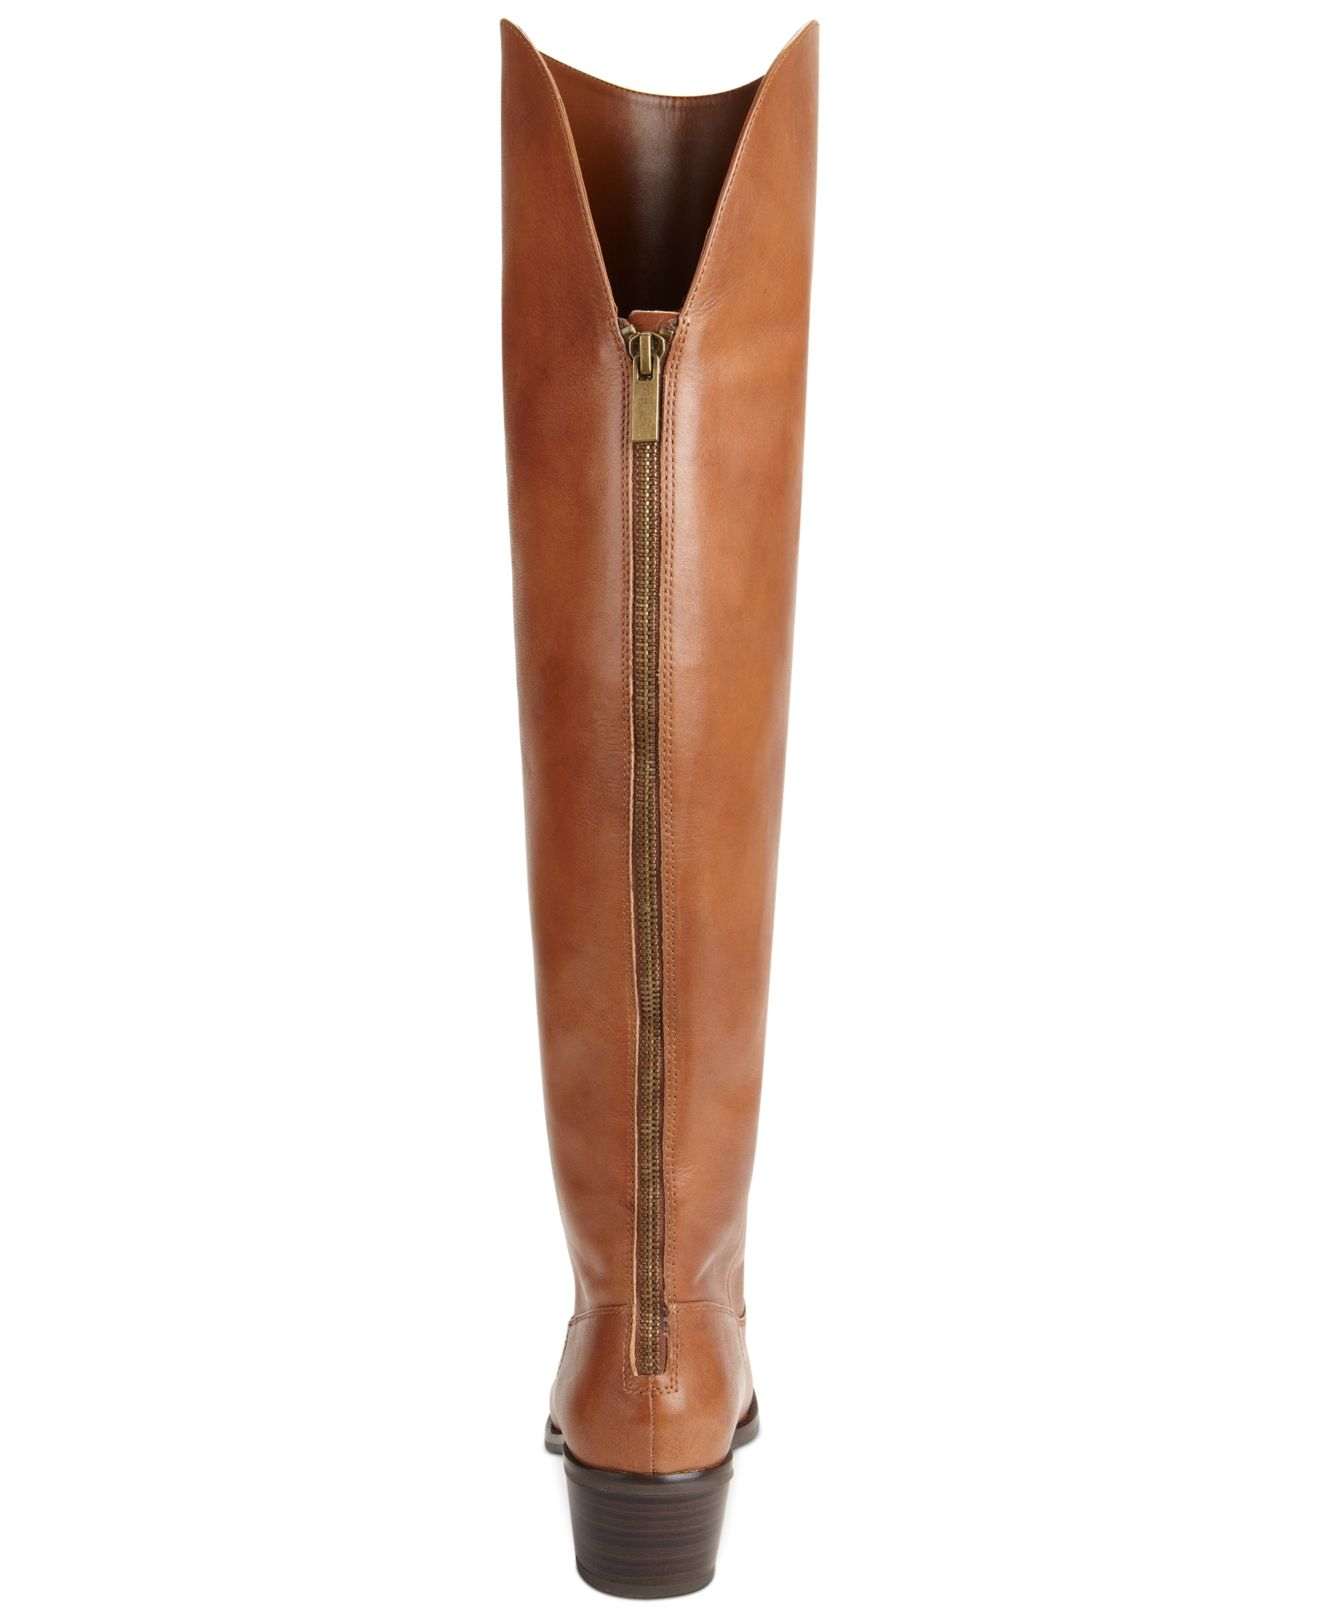 Buy > louxie over the knee boot > in stock